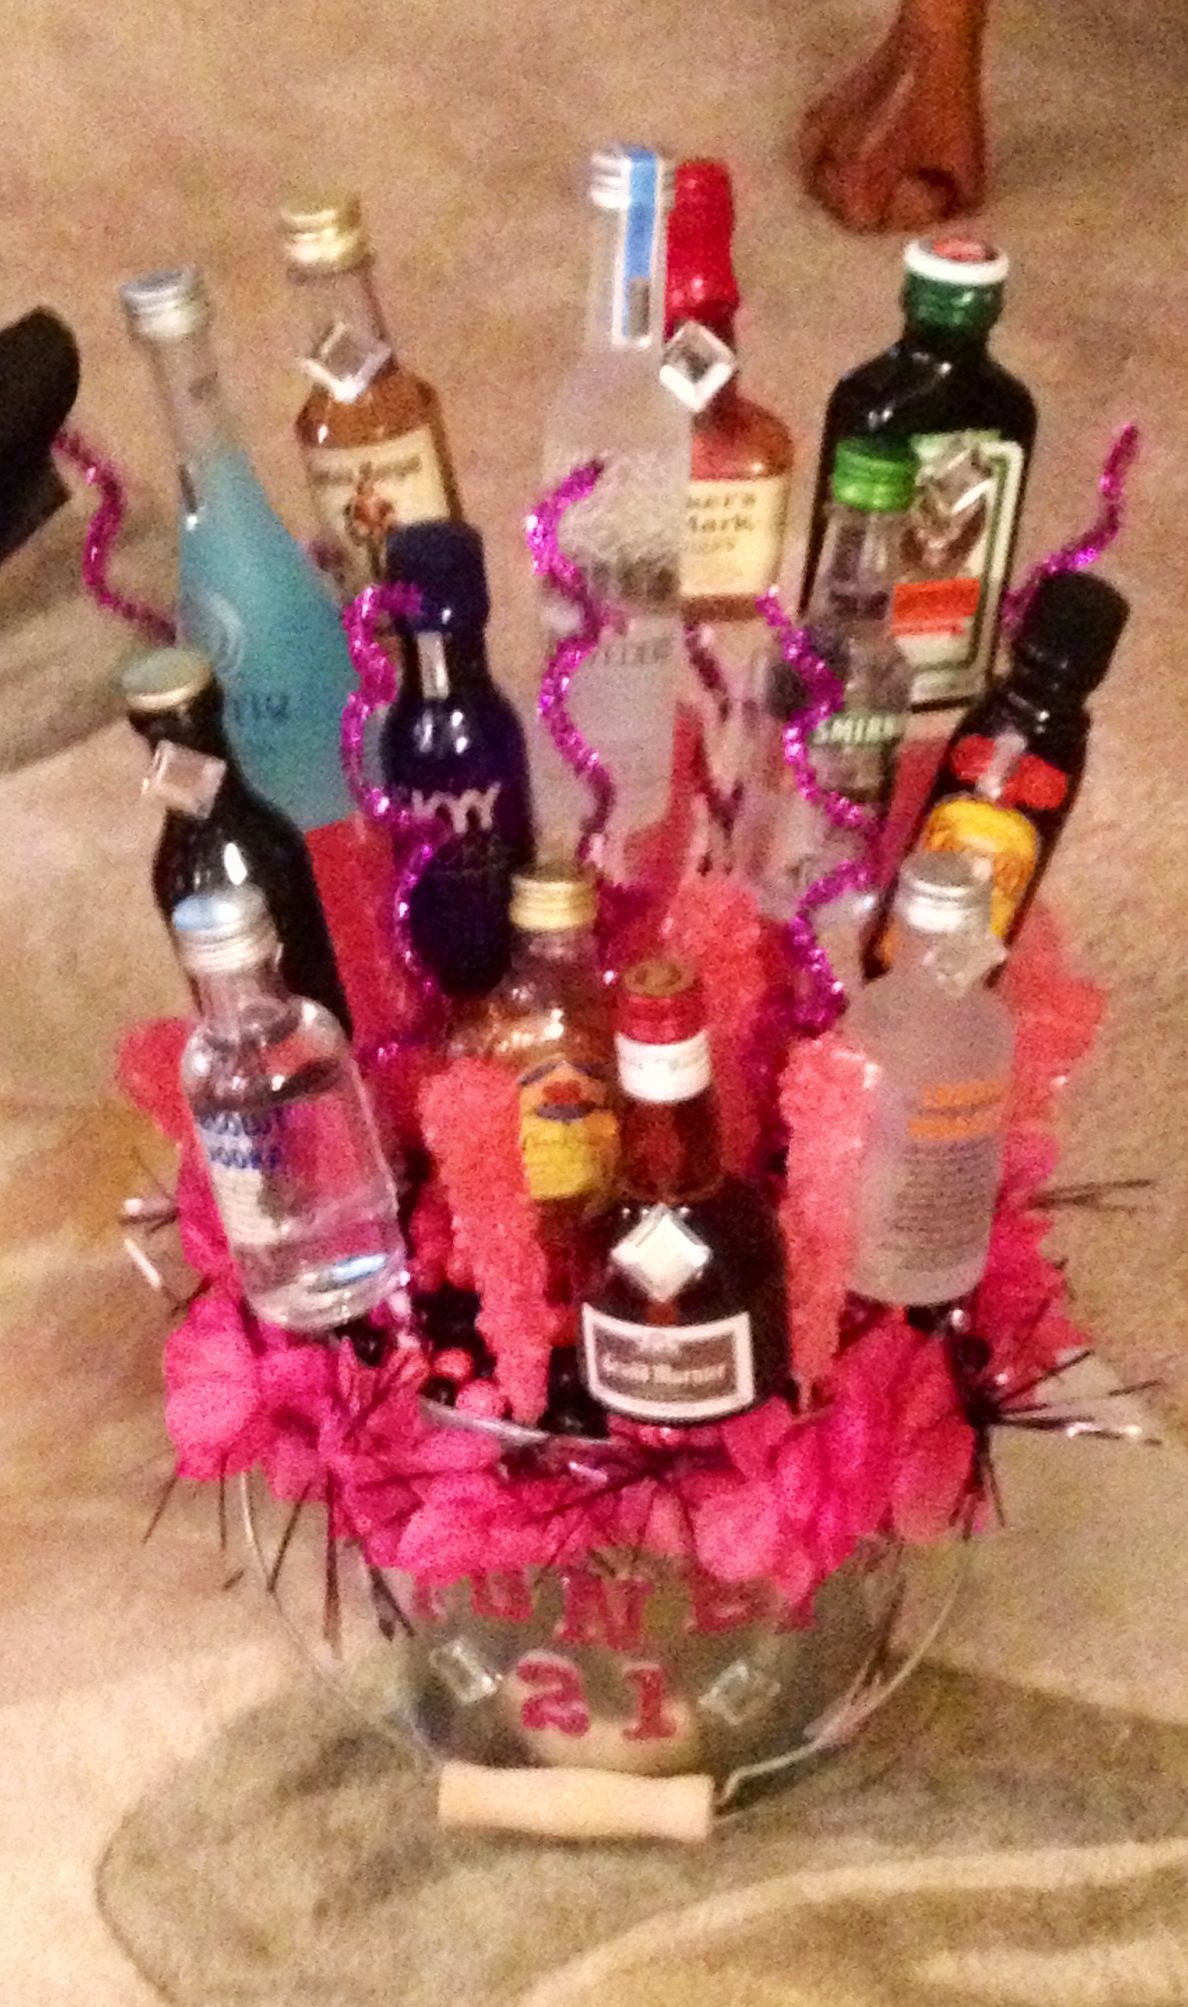 21st Birthday Gift Basket
 Made an edible alcohol basket for my dear friend for her